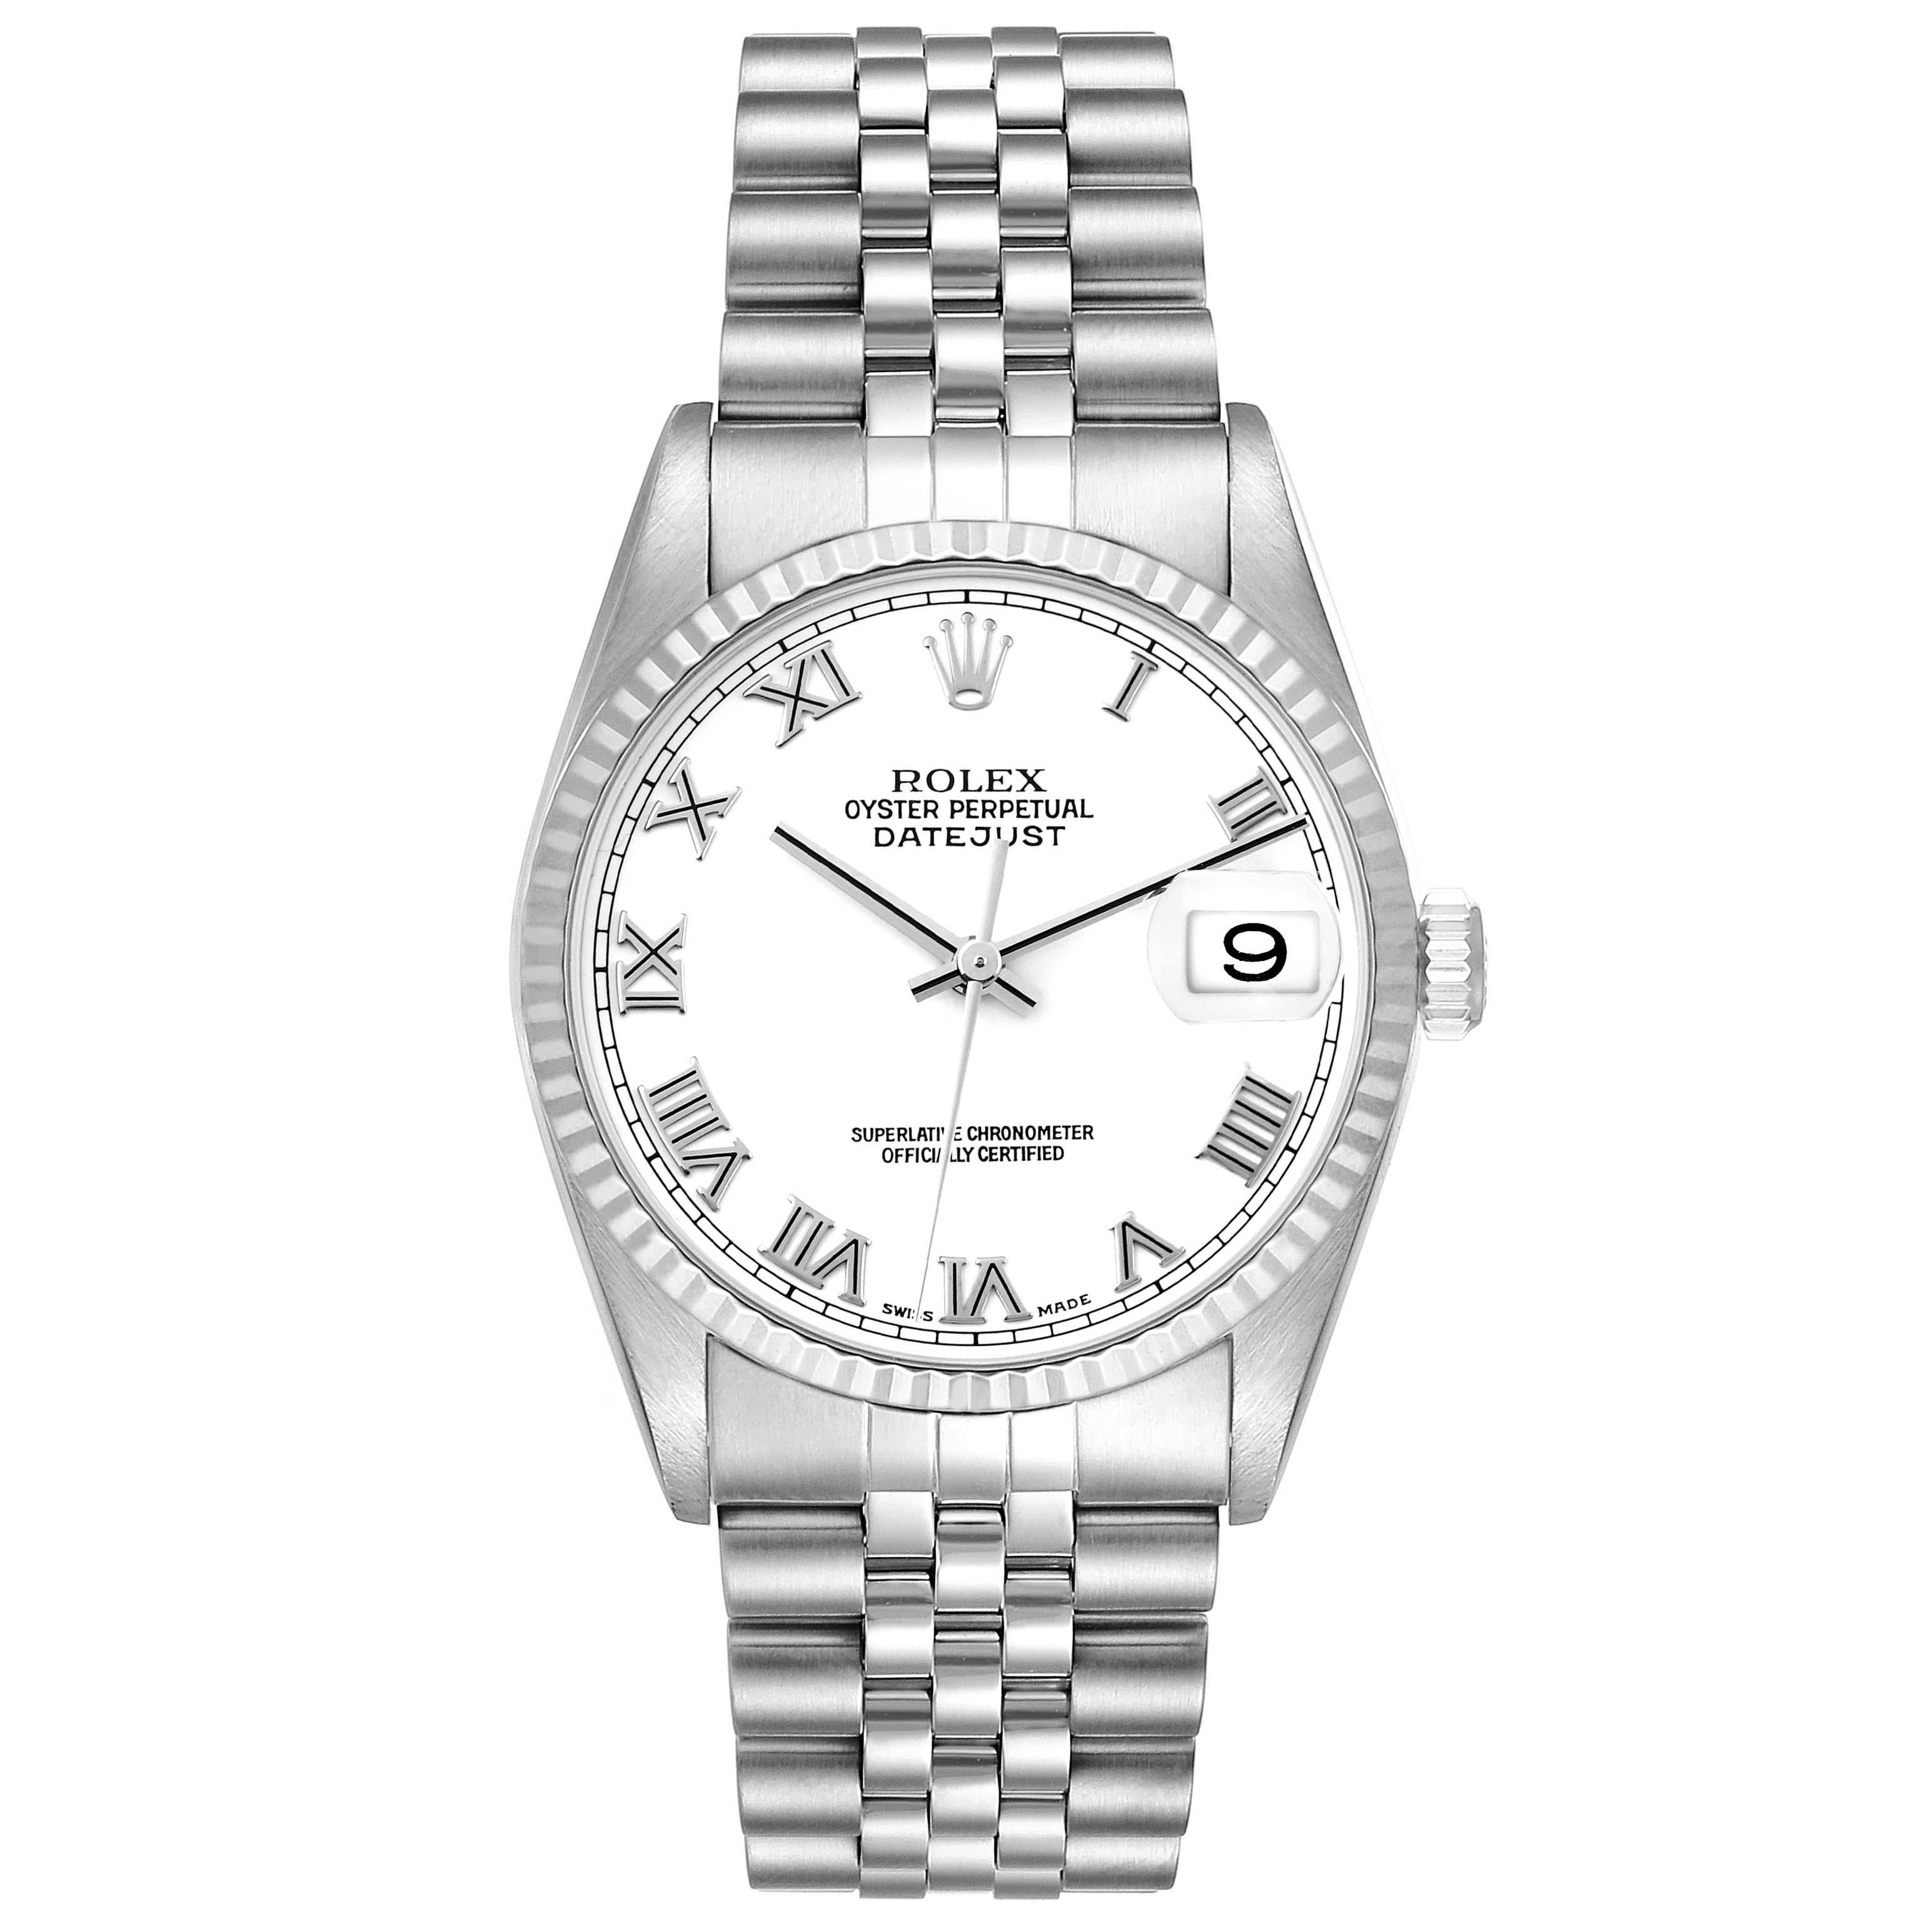 Rolex Datejust Roman Dial Steel White Gold Mens Watch 16234 Box Papers. Officially certified chronometer automatic self-winding movement. Stainless steel oyster case 36 mm in diameter. Rolex logo on the crown. 18k white gold fluted bezel. Scratch